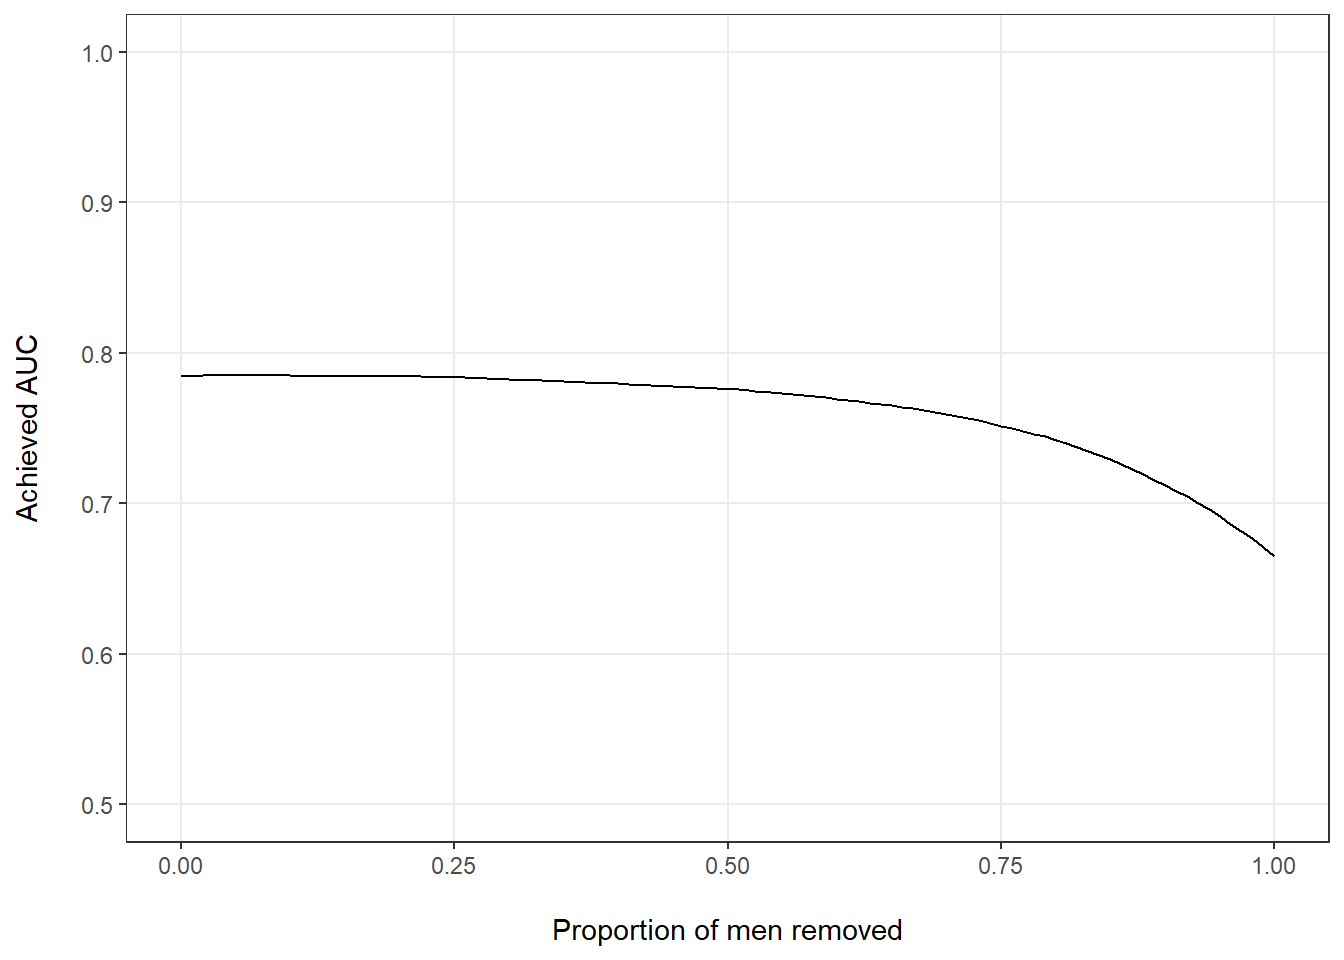 Estimated AUC by proportion of men removed from the full data set.